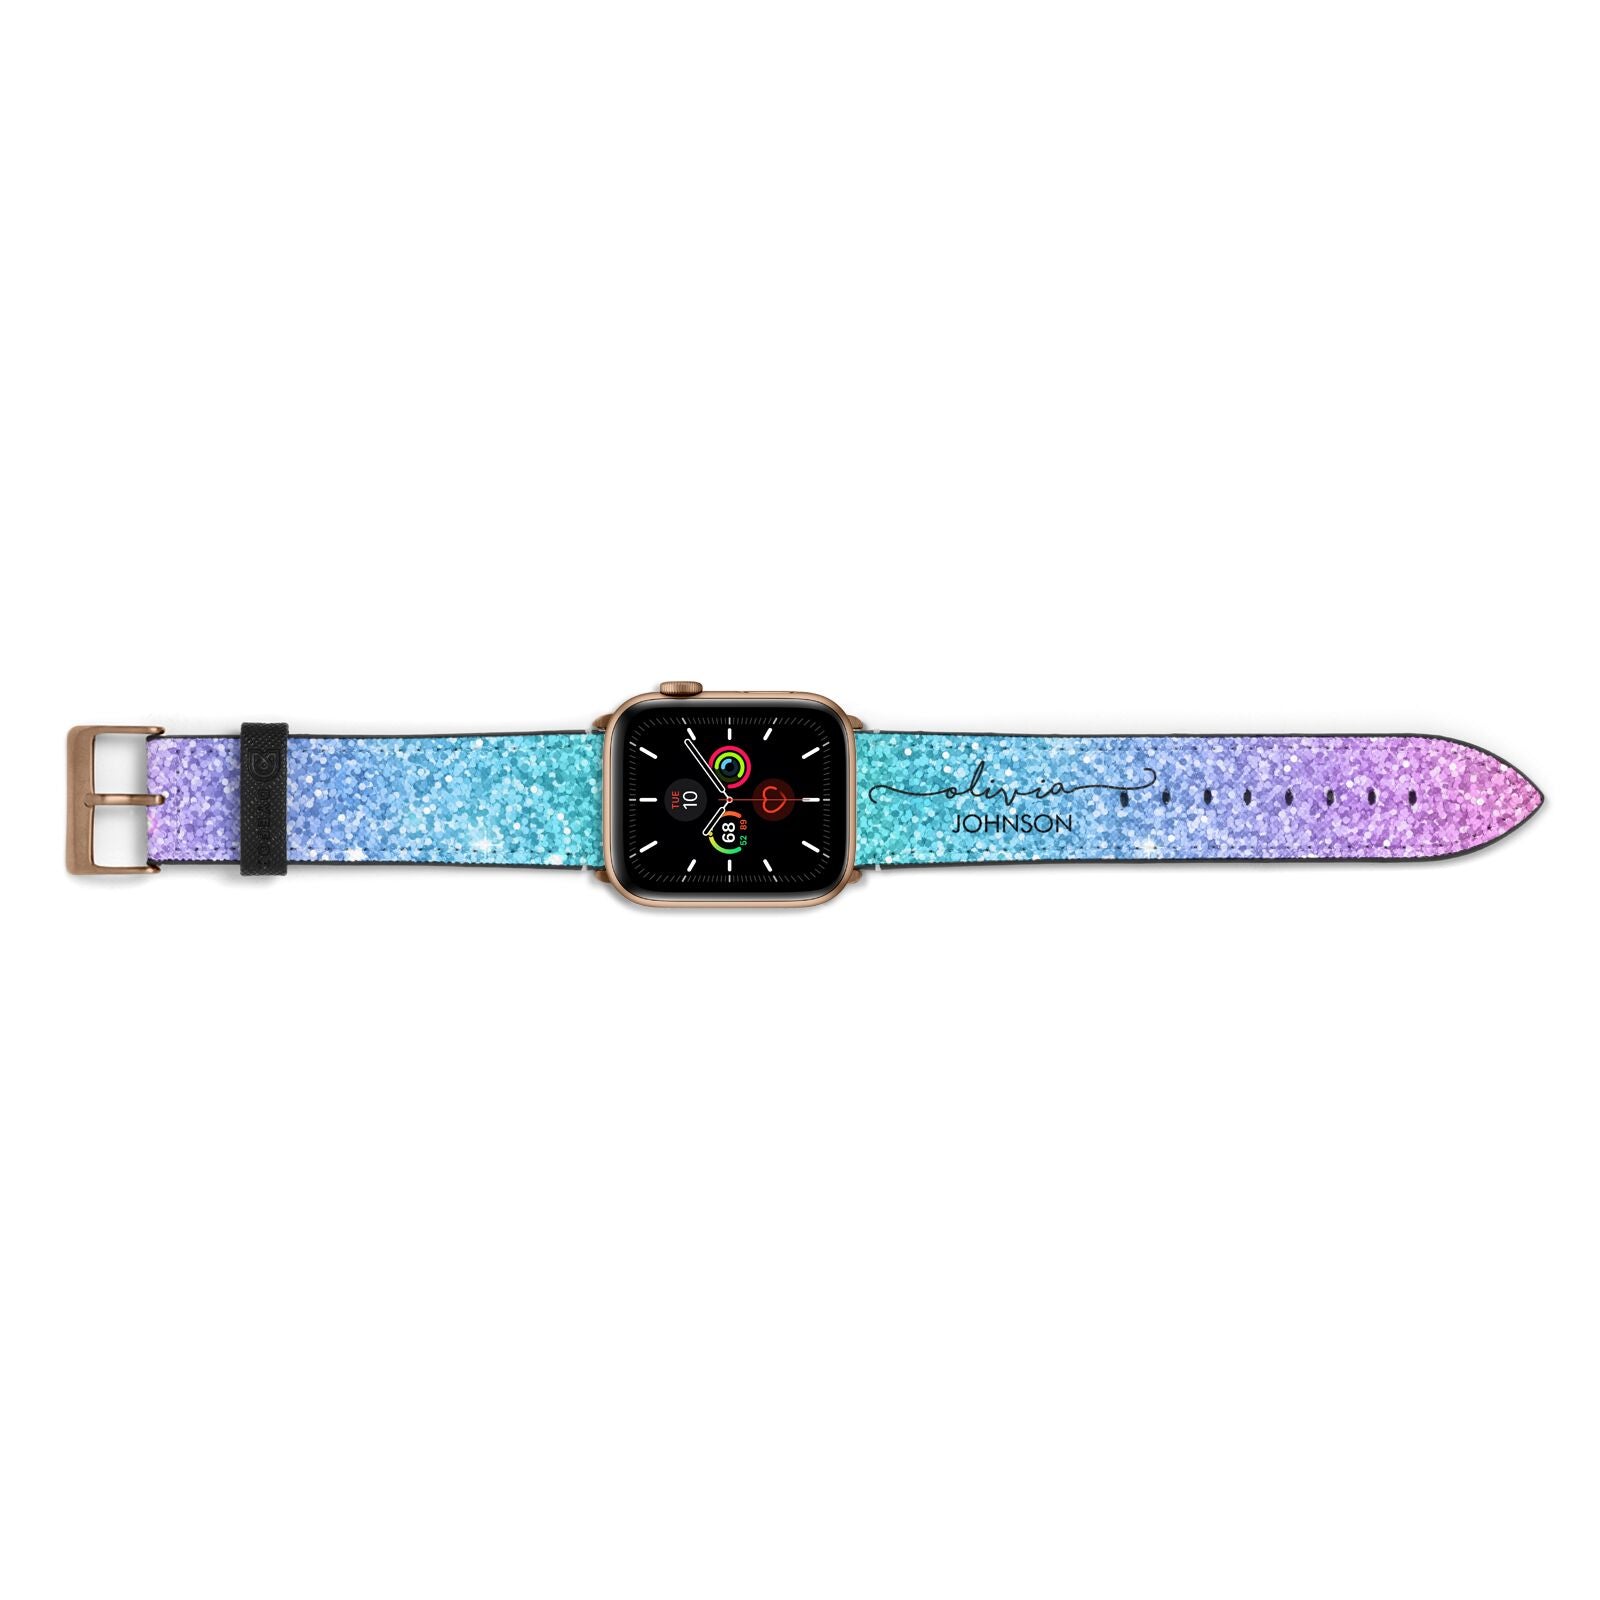 Personalised Ombre Glitter with Names Apple Watch Strap Landscape Image Gold Hardware